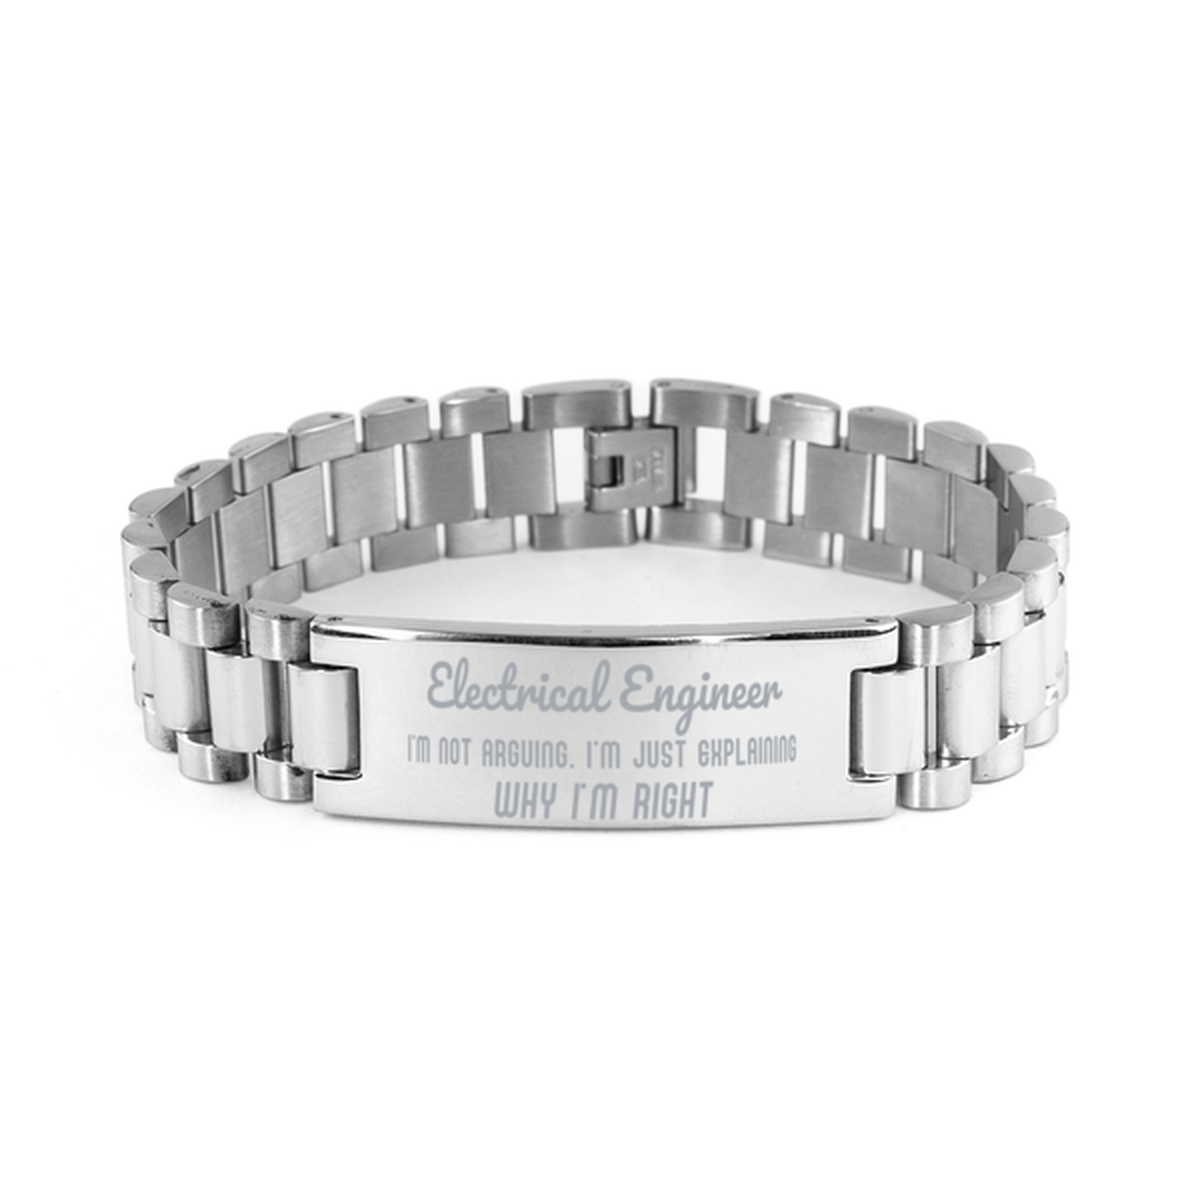 Electrical Engineer I'm not Arguing. I'm Just Explaining Why I'm RIGHT Ladder Stainless Steel Bracelet, Graduation Birthday Christmas Electrical Engineer Gifts For Electrical Engineer Funny Saying Quote Present for Men Women Coworker